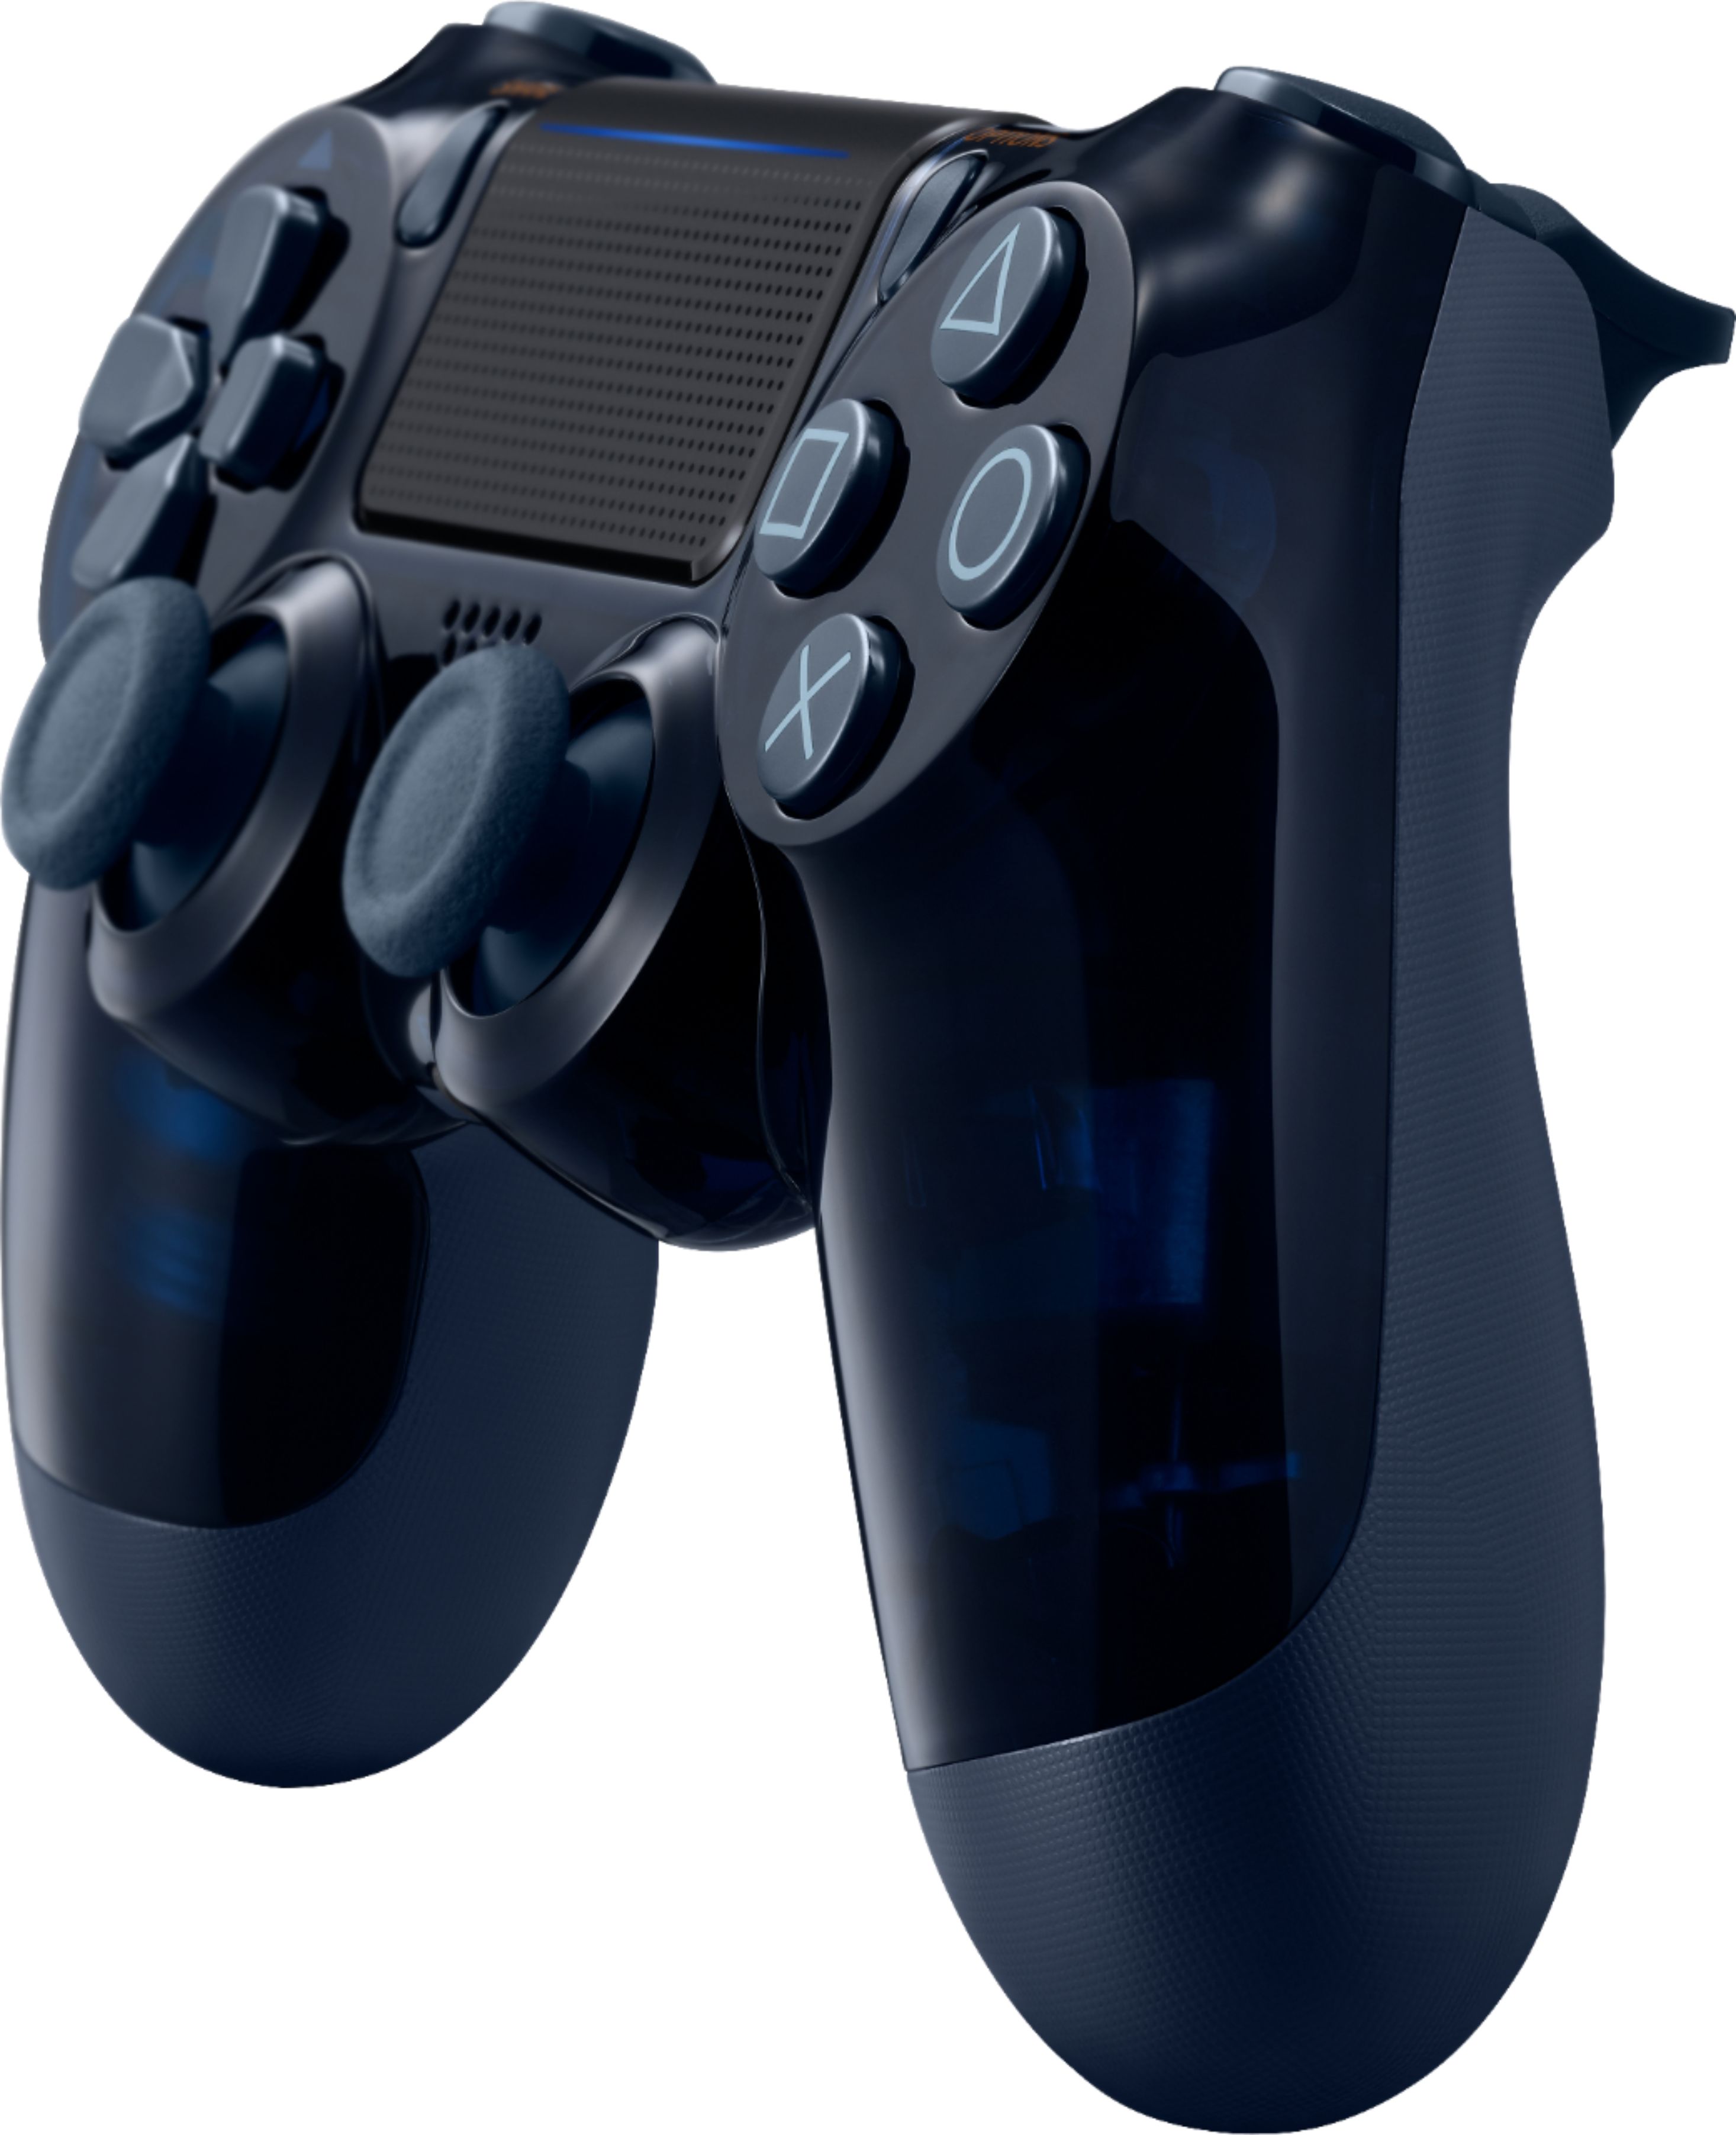 dualshock limited edition